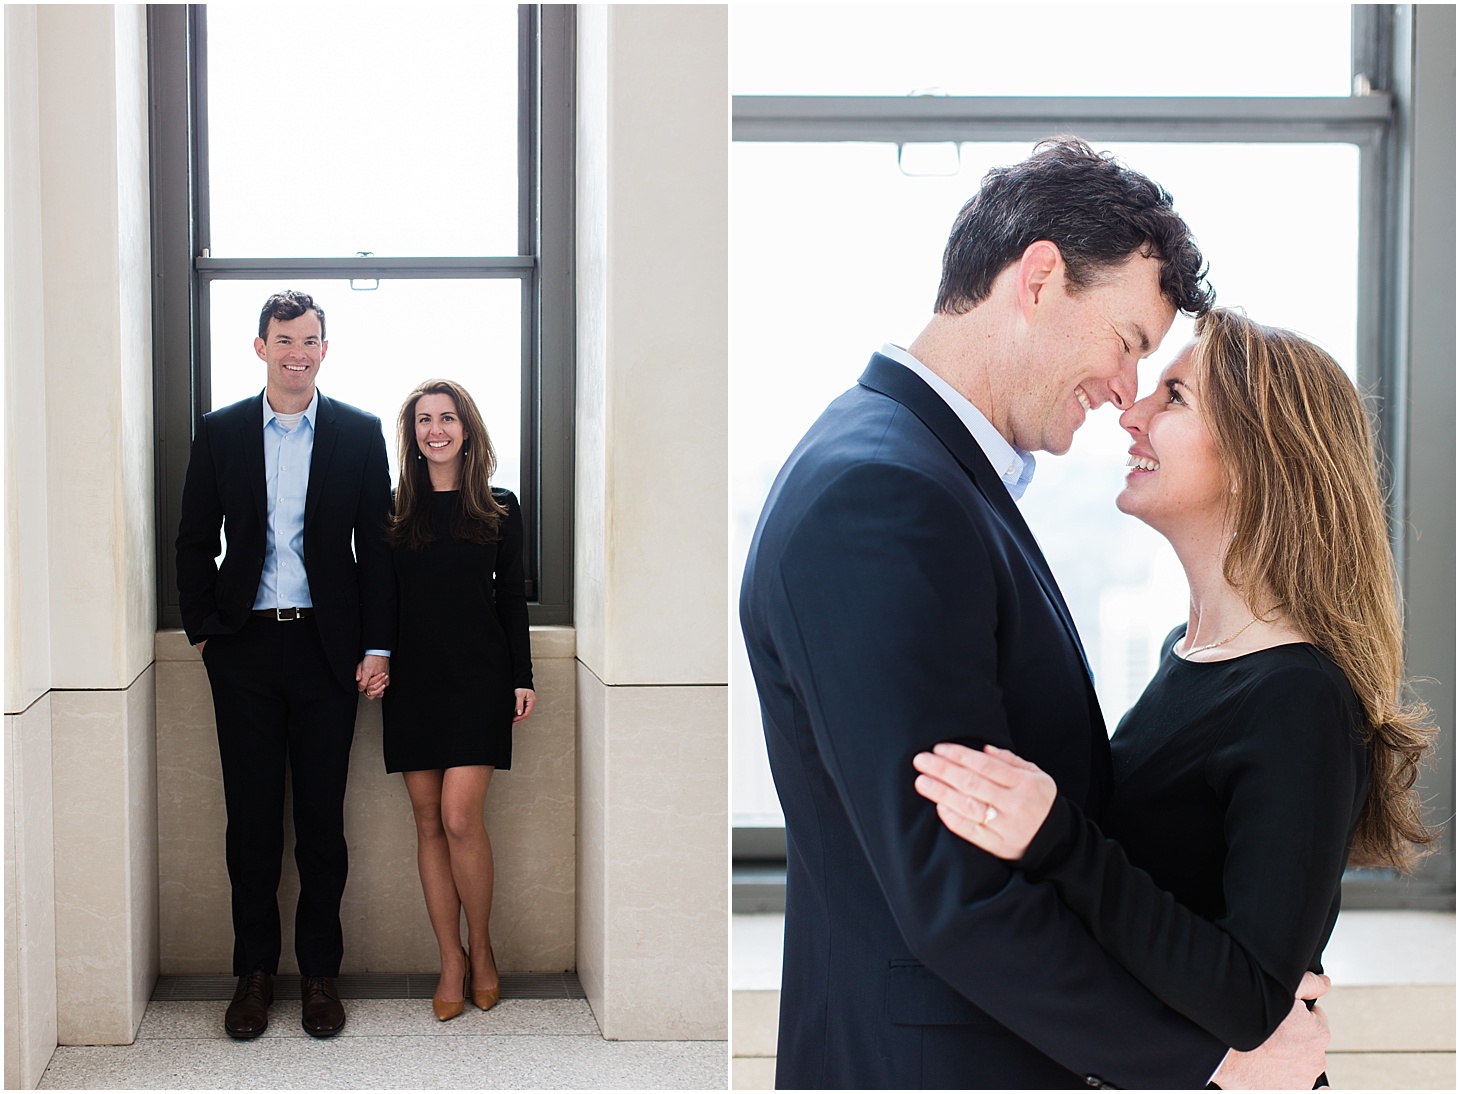 Top of the Rock Engagement Portraits | Springtime Engagement Session in New York City | Sarah Bradshaw Photography